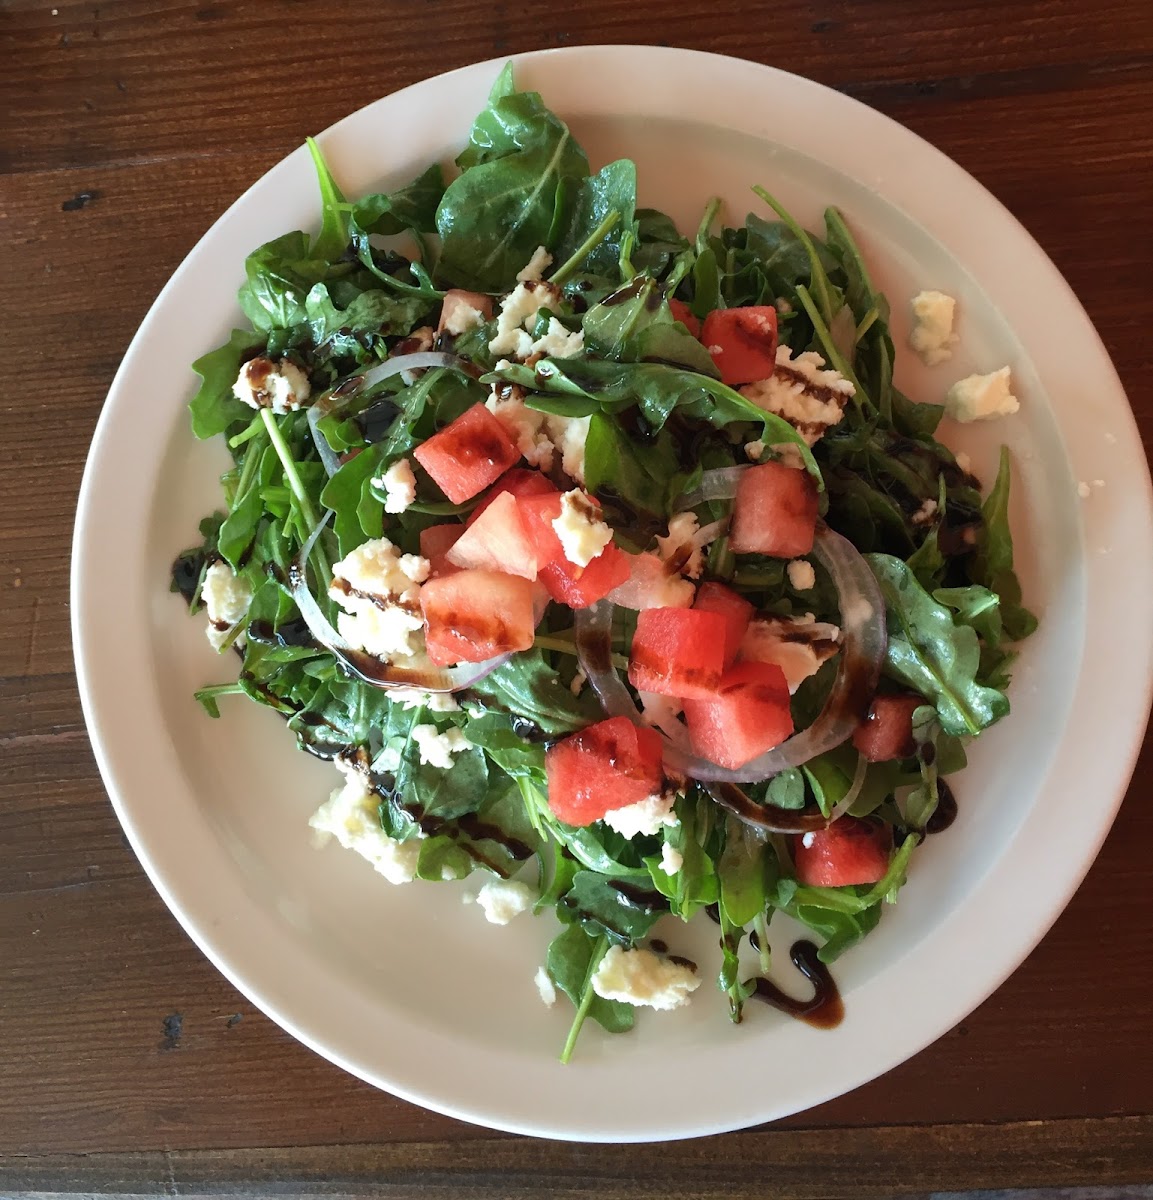 Watermelon and arugula salad with balsamic drizzle